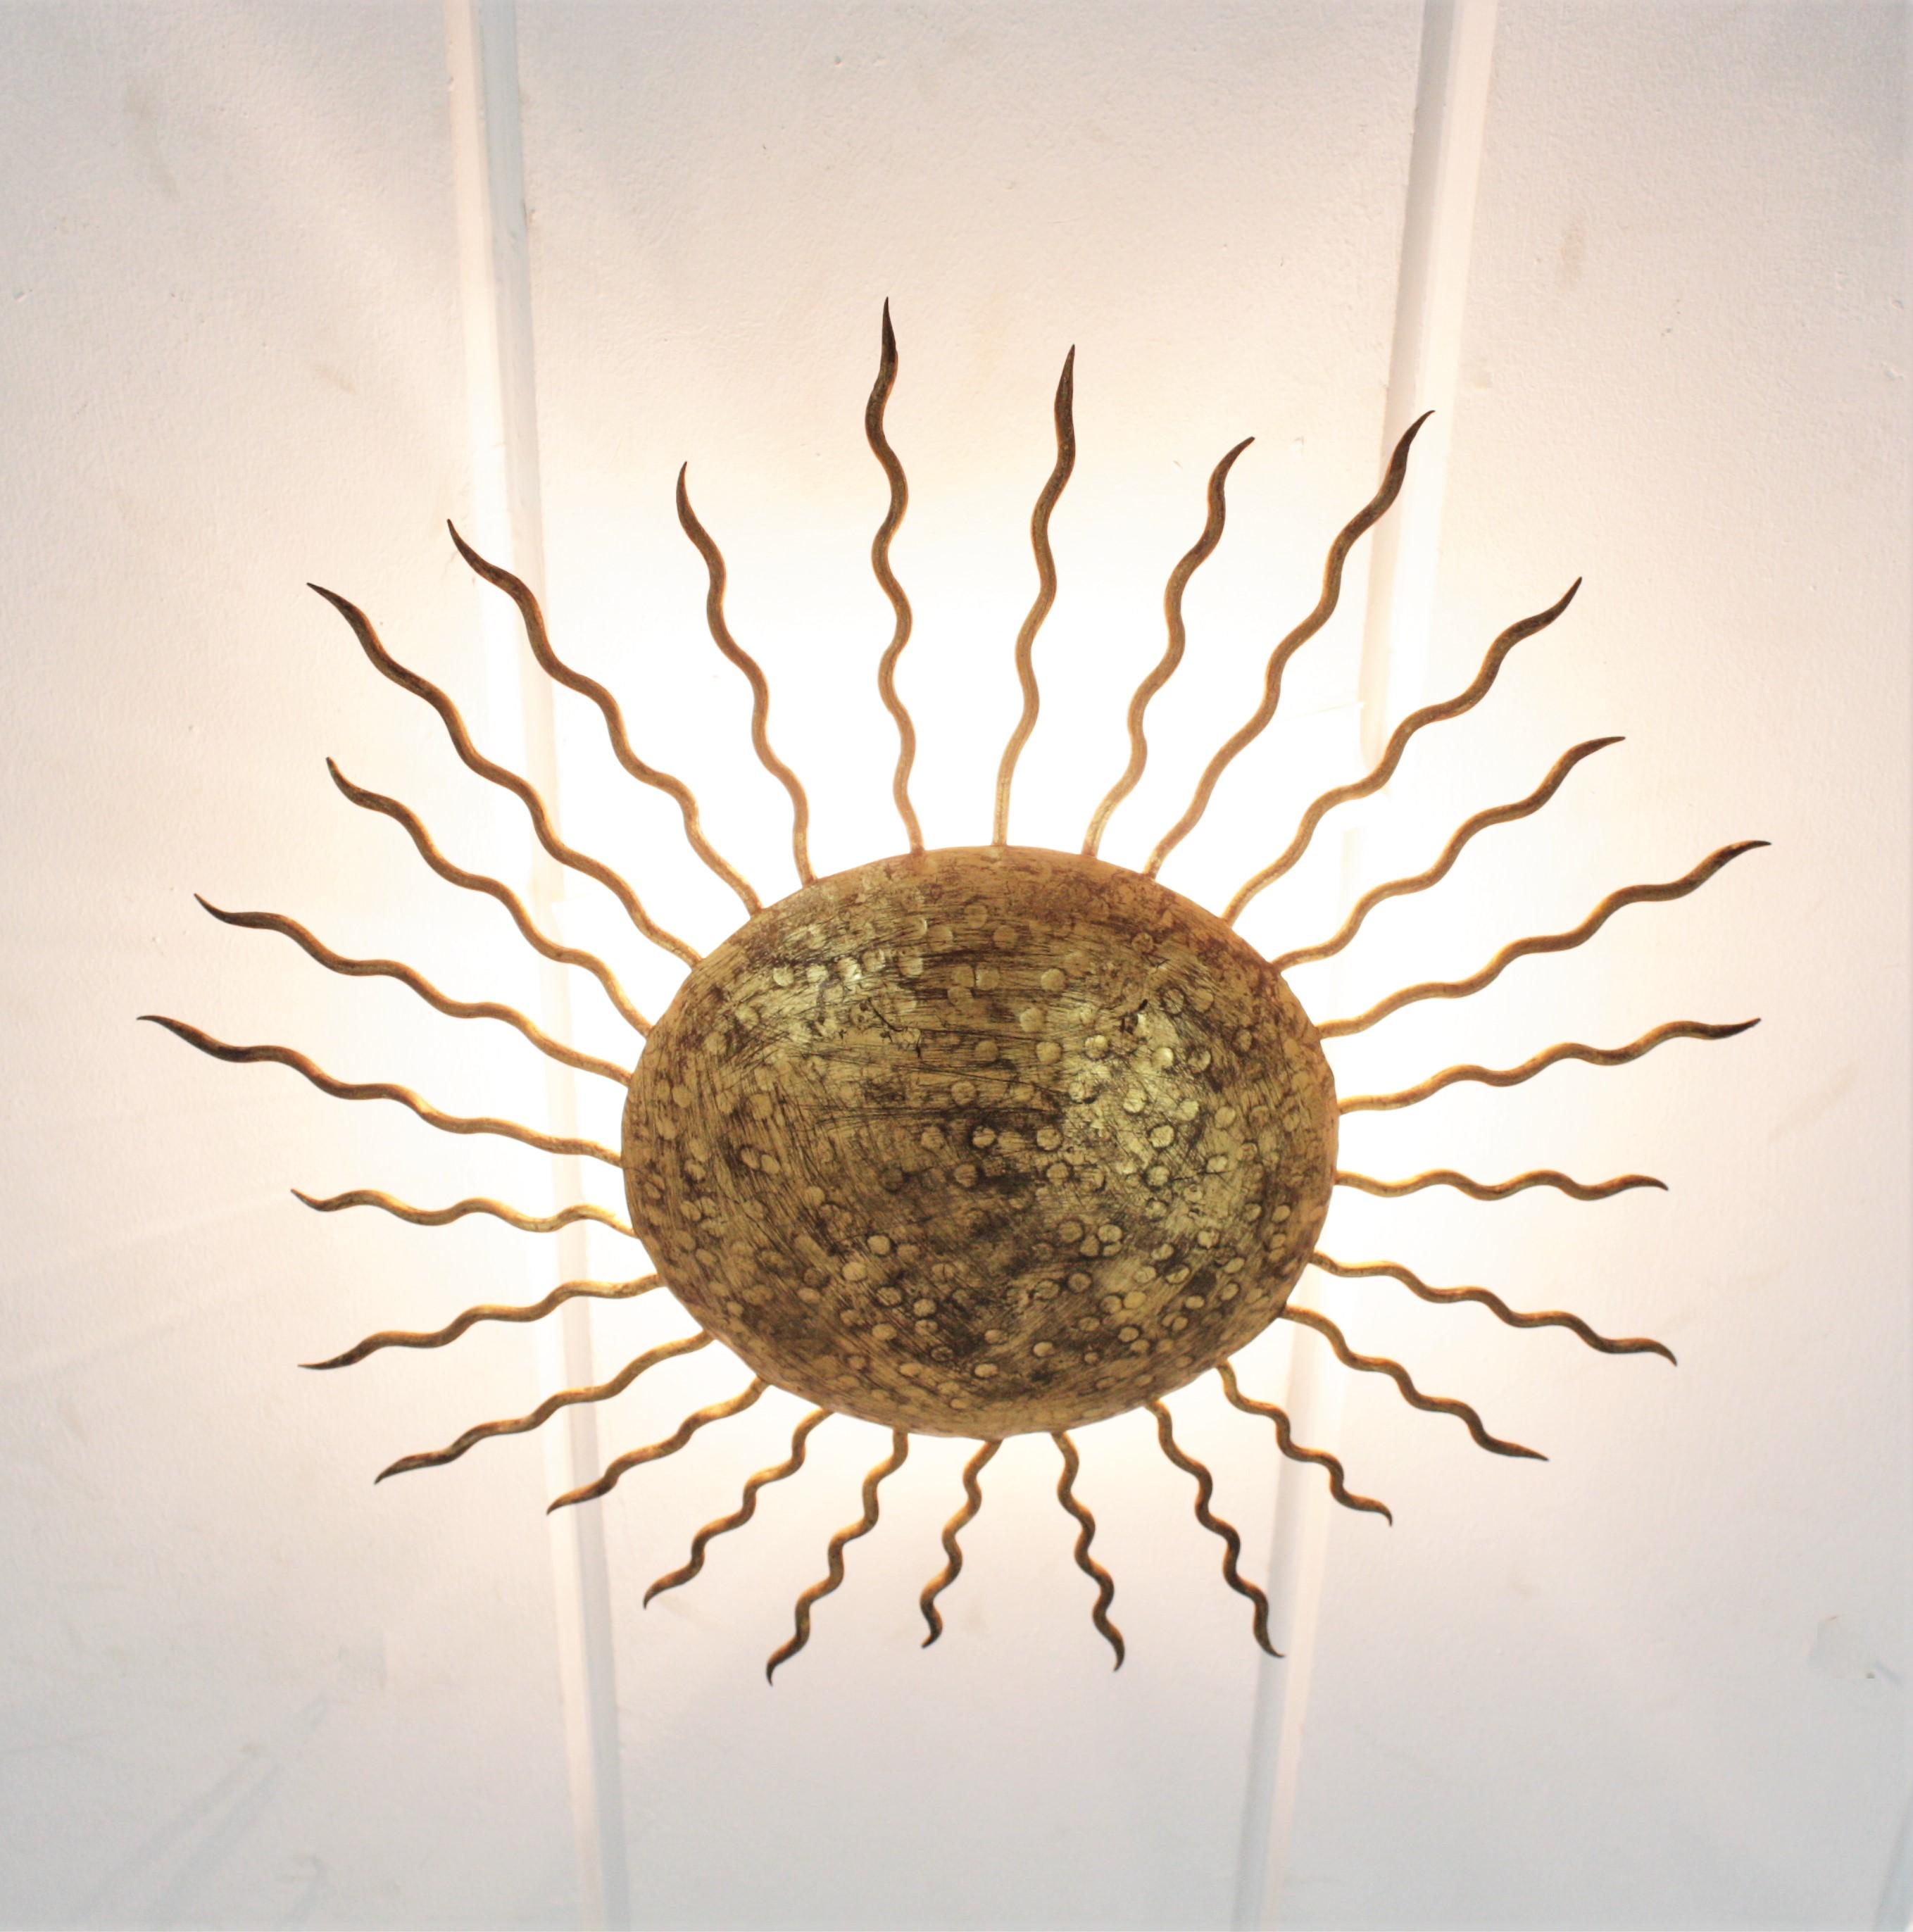 Large Sunburst Ceiling Light Fixture in Hand Hammered Gilt Iron, 1950s For Sale 4